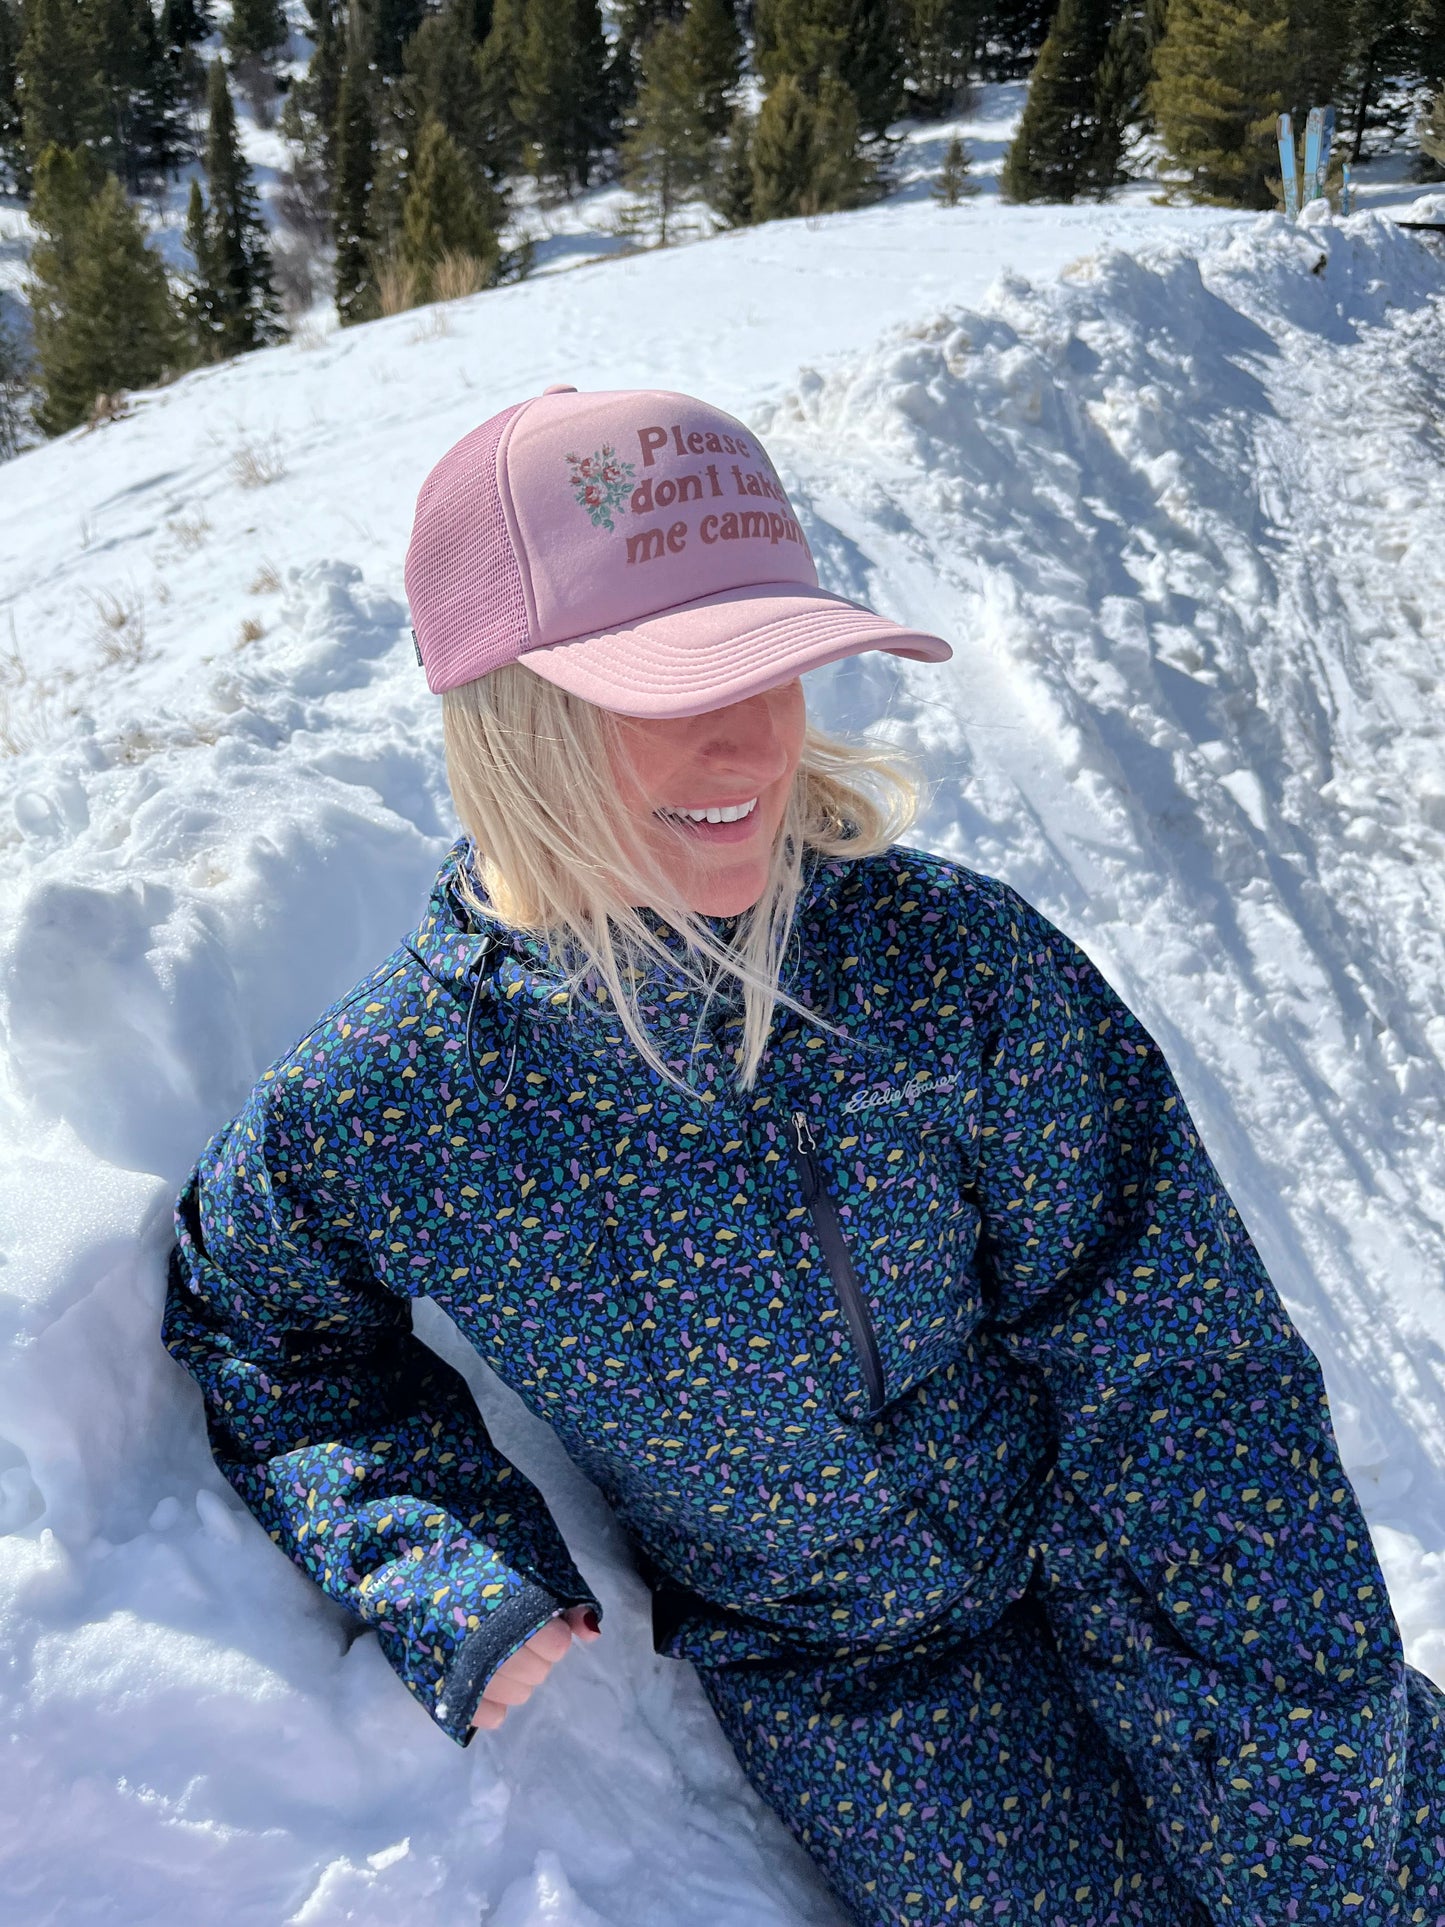 cute trucker hat womens fun dont take me camping funny baseball hat pink flowers floral retro style coin laundry hiking outdoors skiing fun 